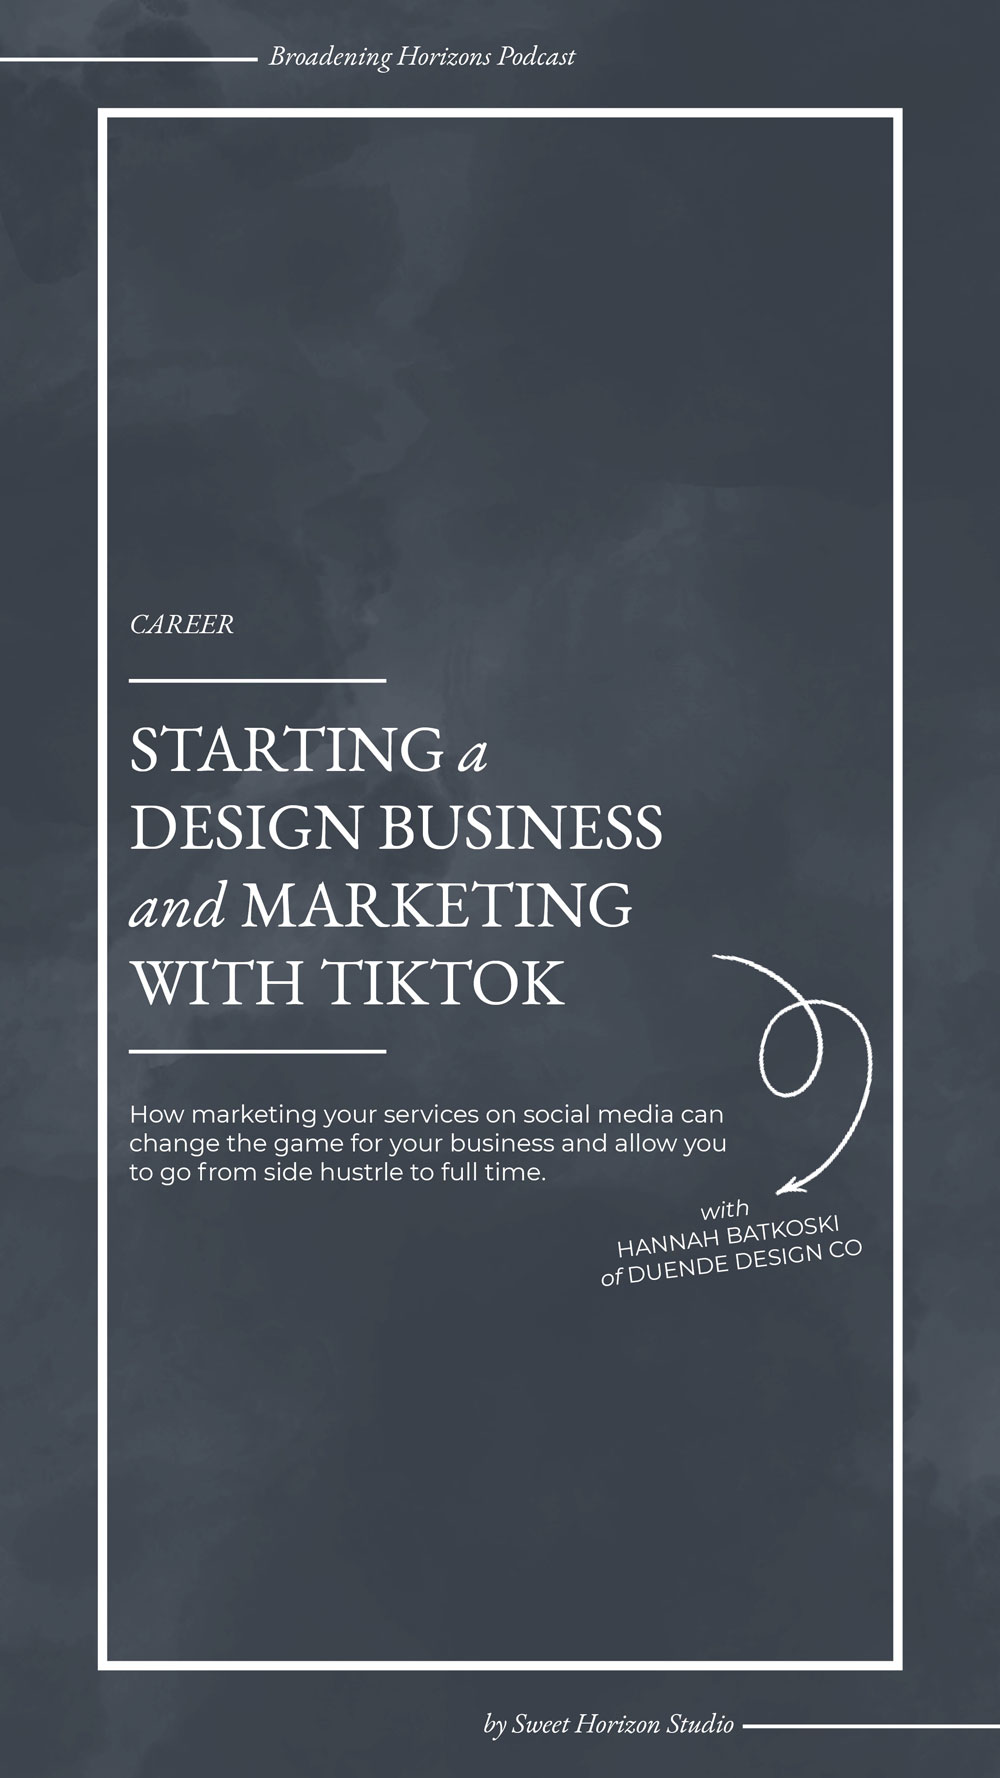 Starting a Design Business and Marketing with TikTok with Duende Design Co from www.sweethorizonblog.com